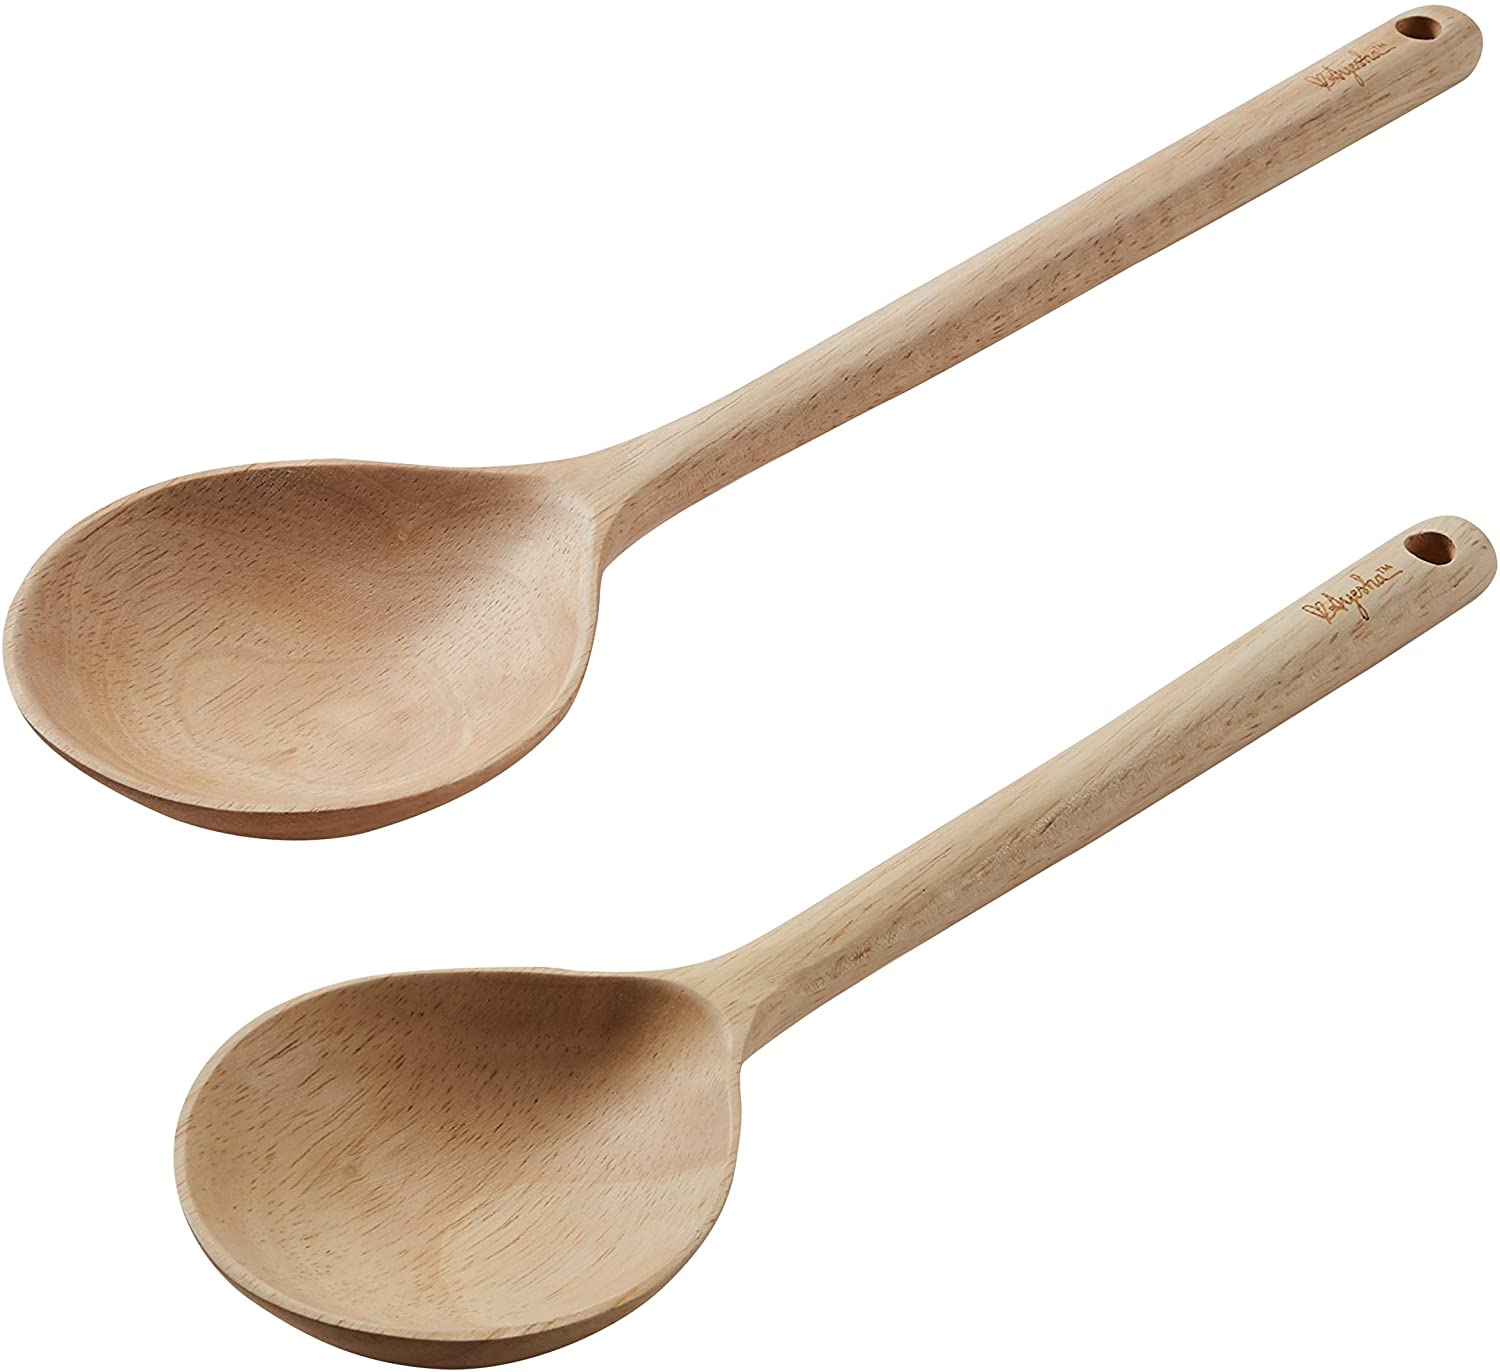 Ayesha Curry Tools Parawood Solid Wooden Spoon, 2-Piece